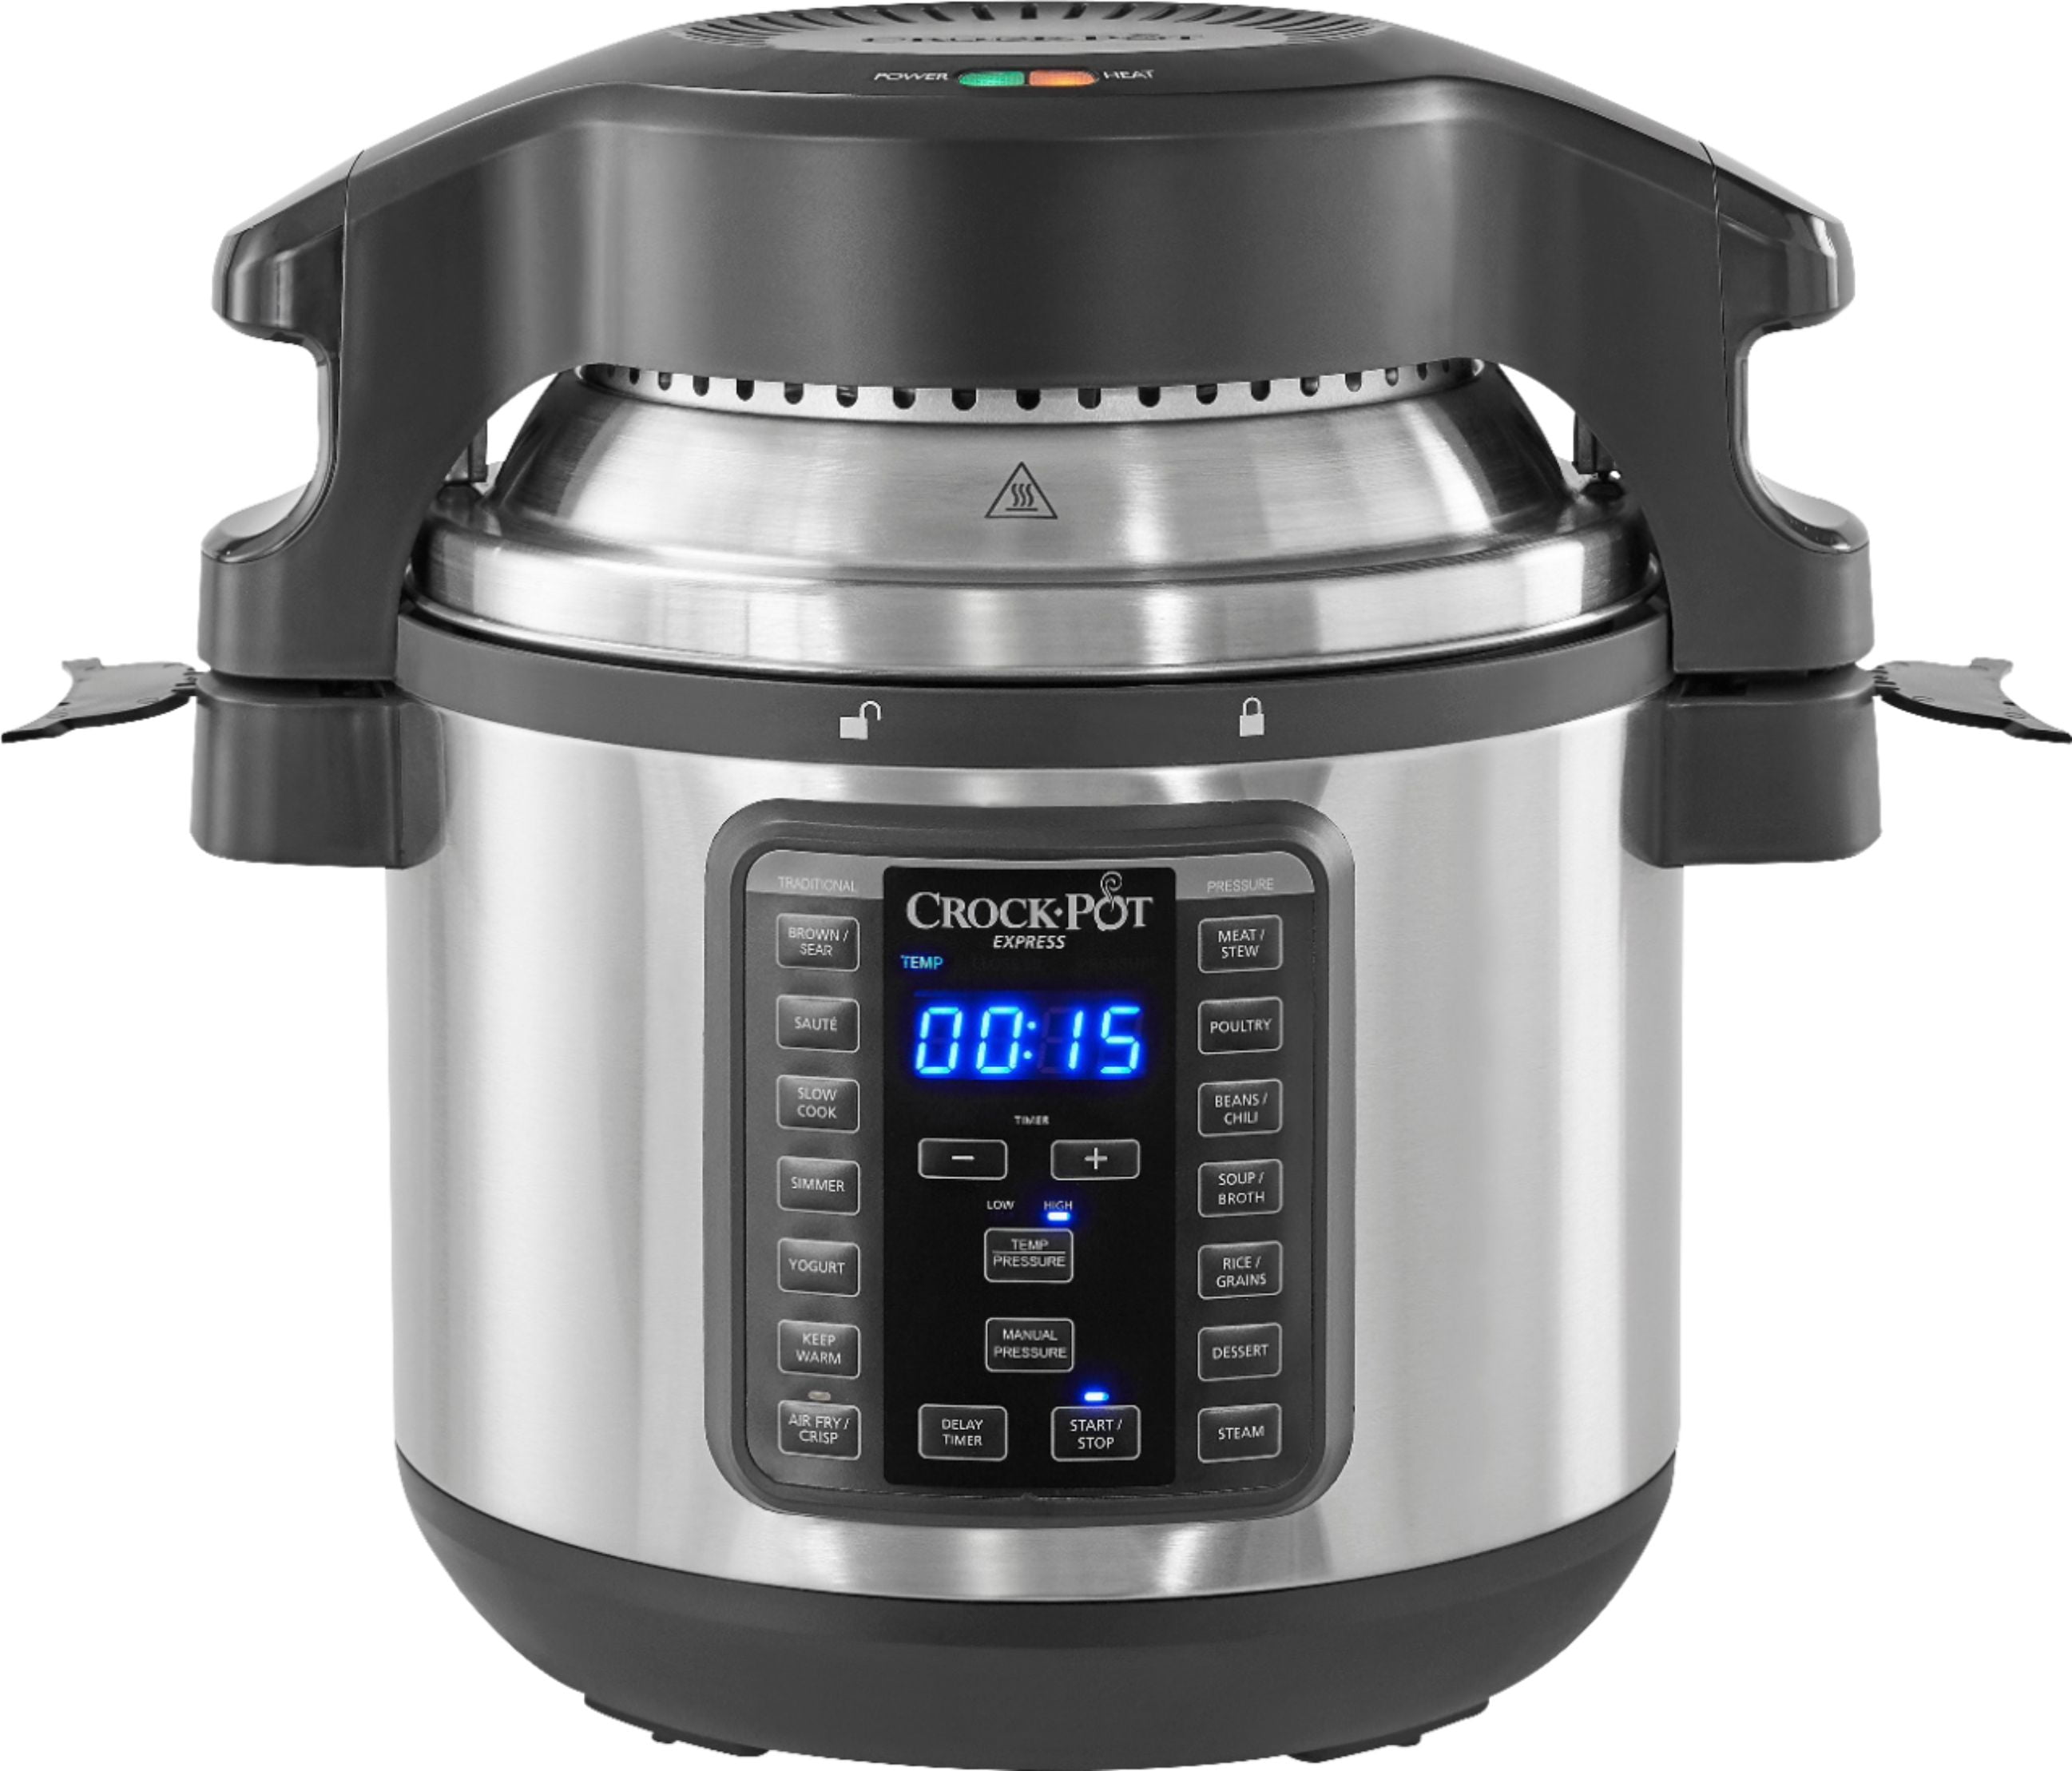 Crock-Pot - 8-Qt. Express Crock Slow Cooker and Pressure Cooker with Air Lid - Stainless Steel - Walmart.com